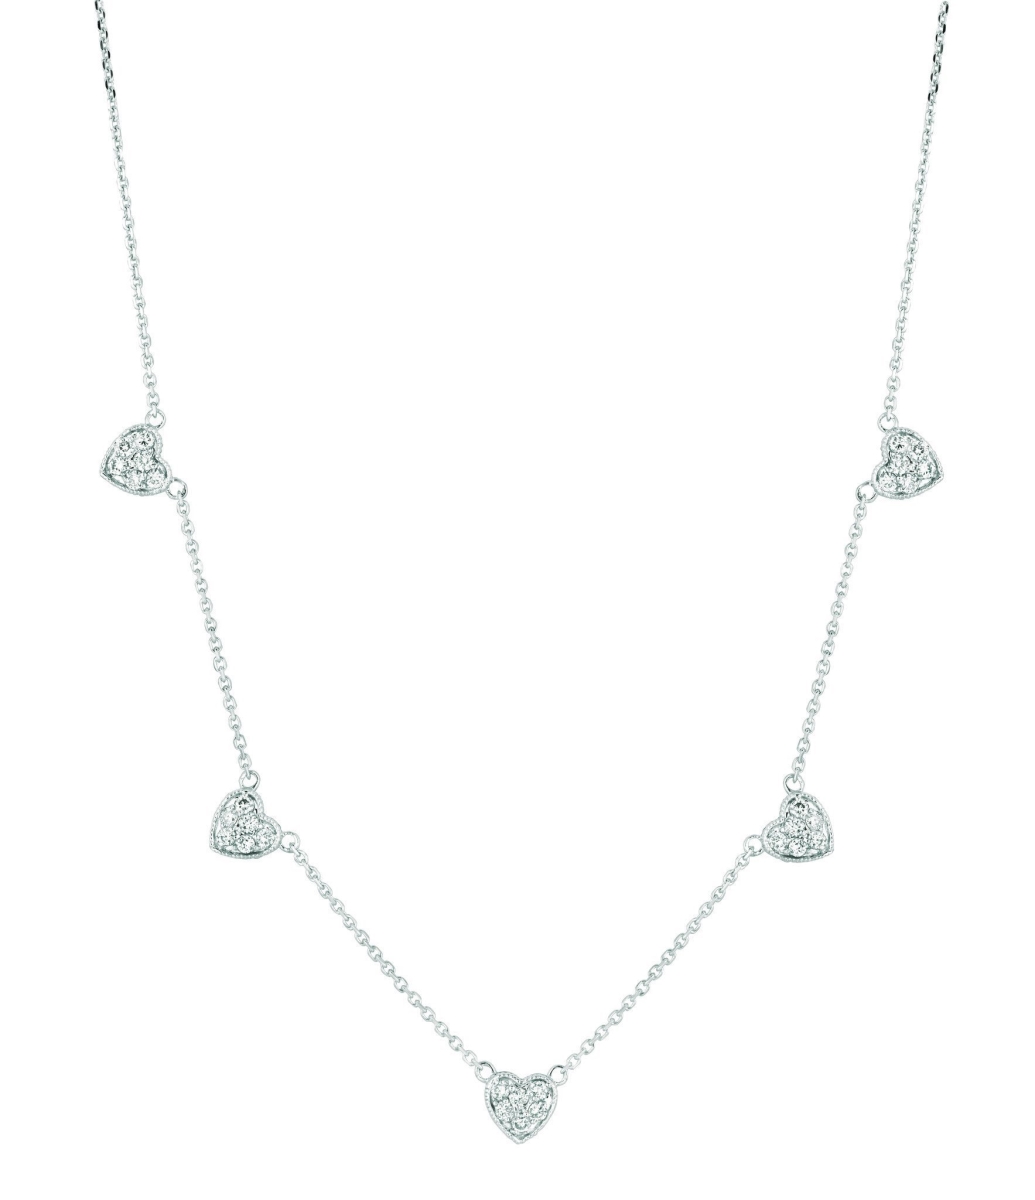 Picture of Harry Chad Enterprises 16309 0.75 CT 14K White Pave Diamond Heart Necklace Chain